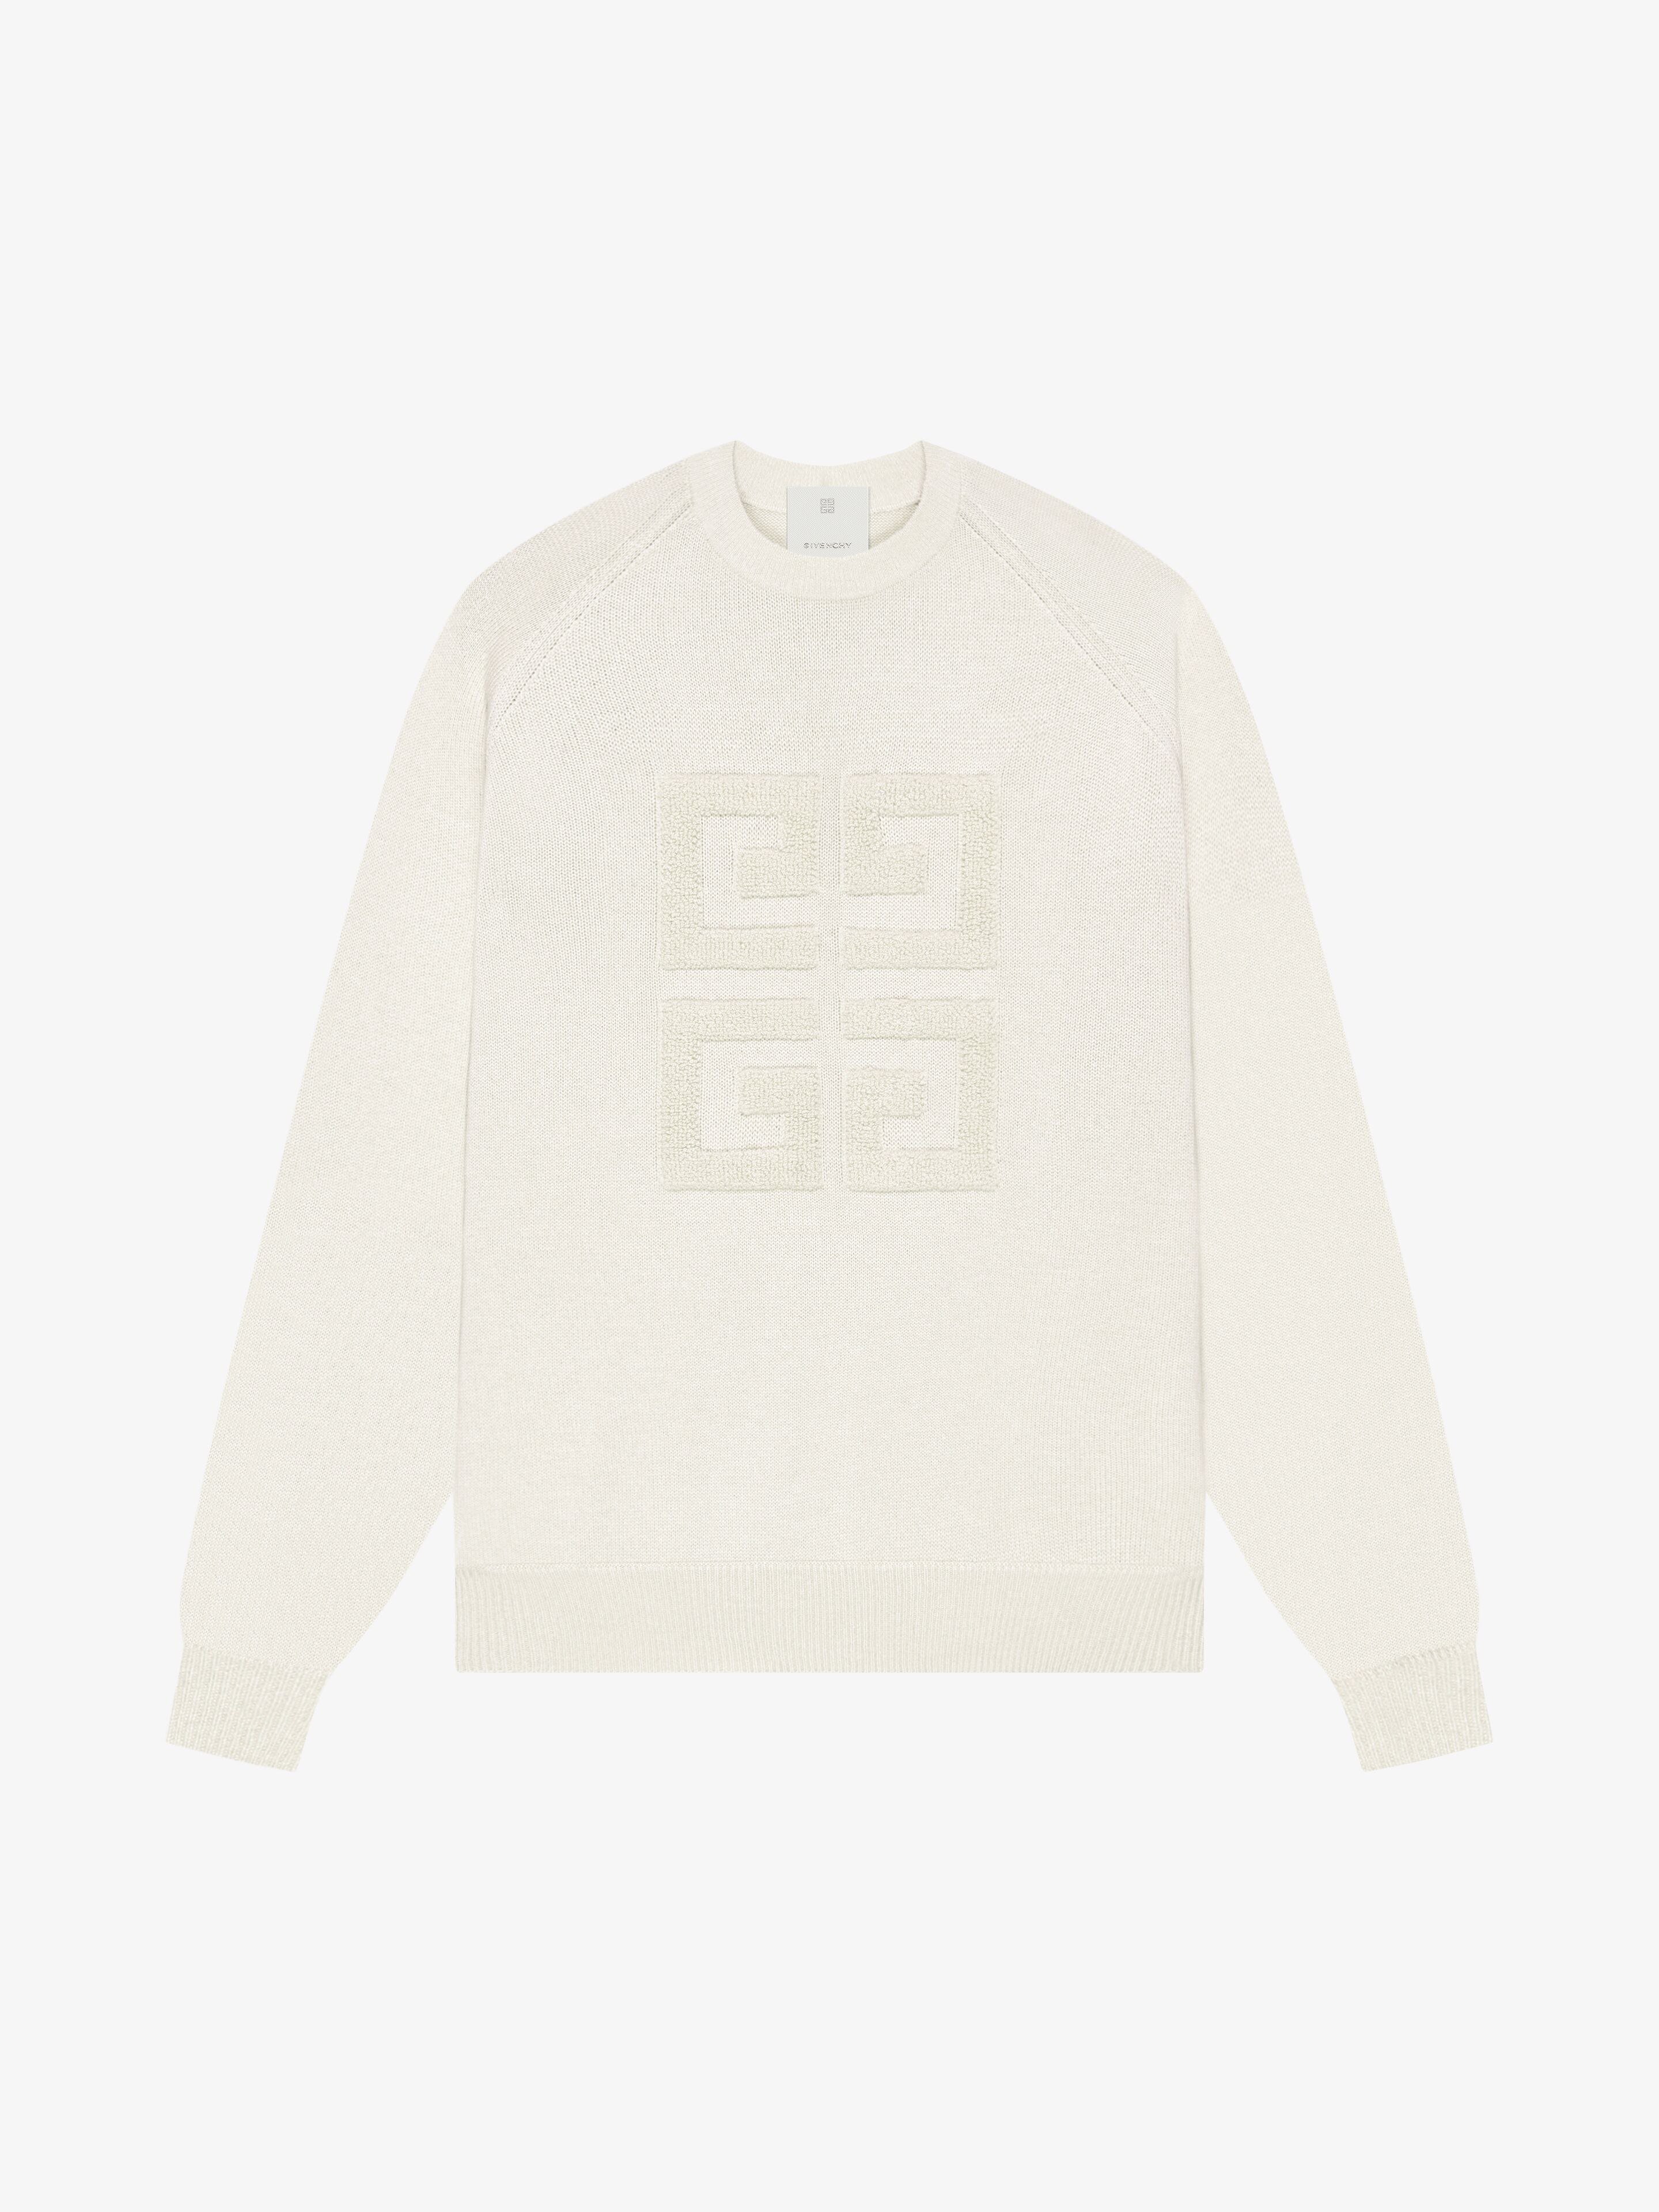 GIVENCHY-knits-Givenchy Logo-Knit Distressed Cotton Sweater. #givenchy # knits